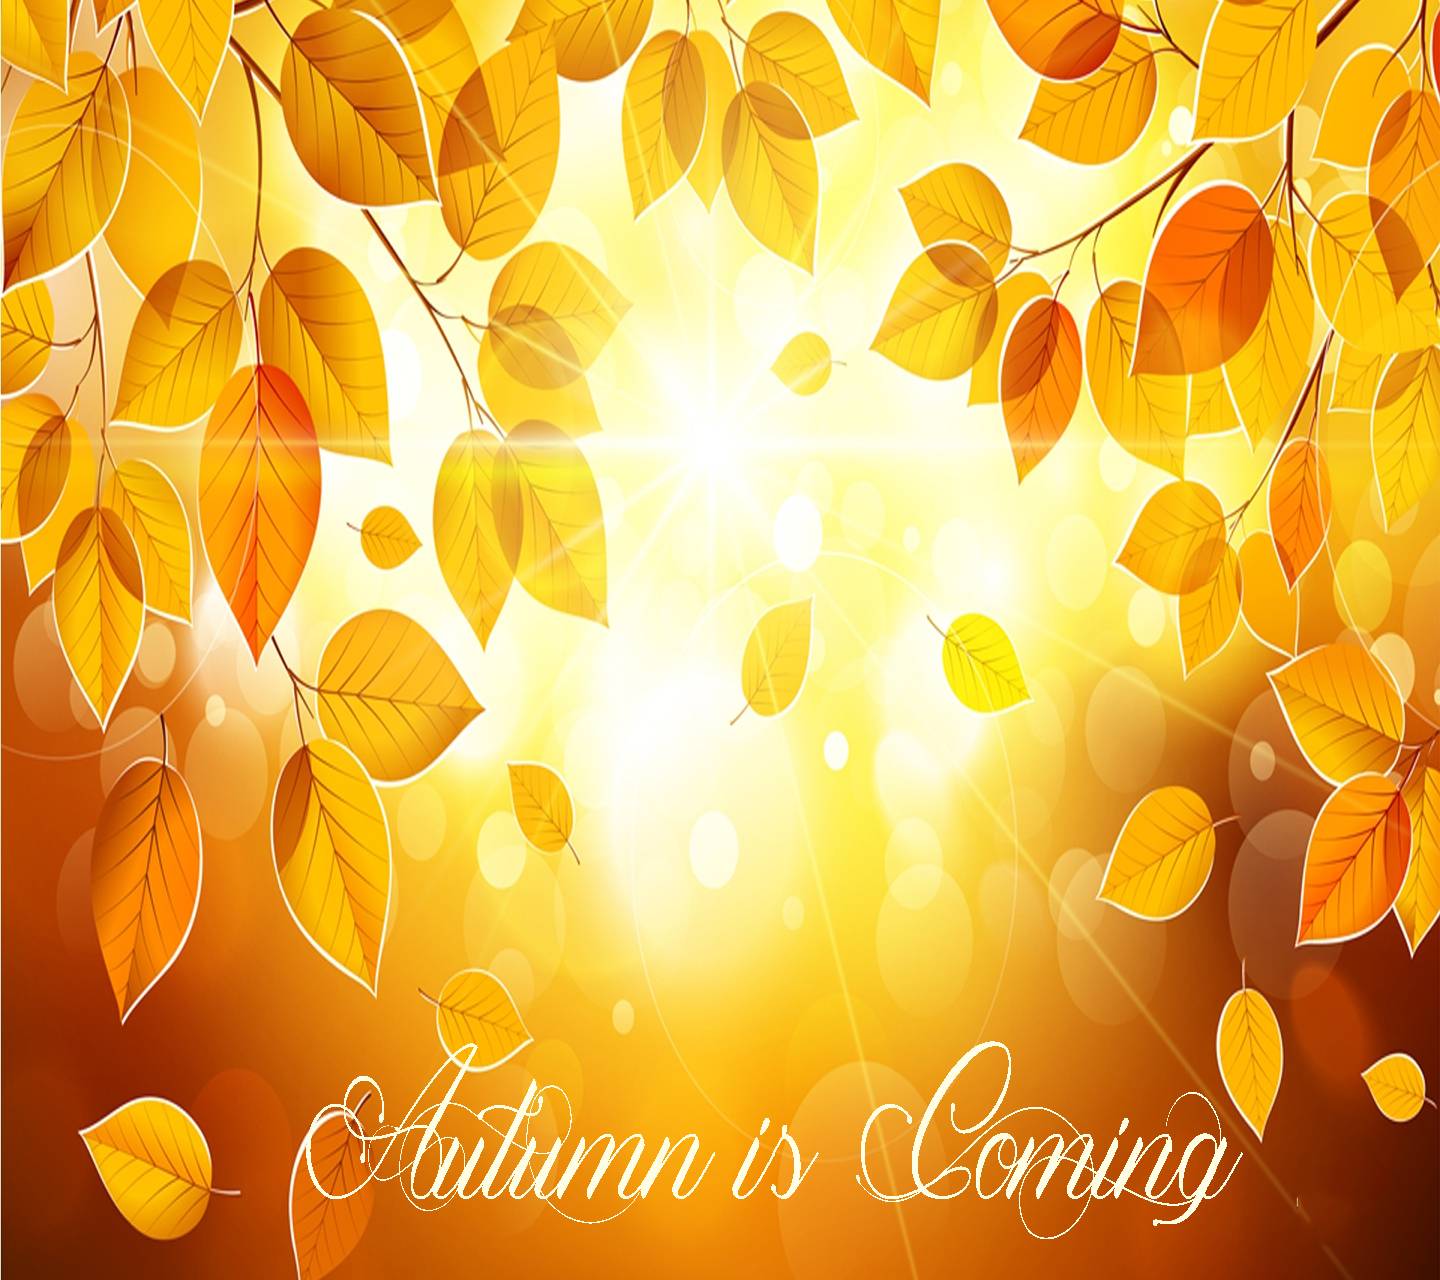 Autumn is Coming Wallpaper